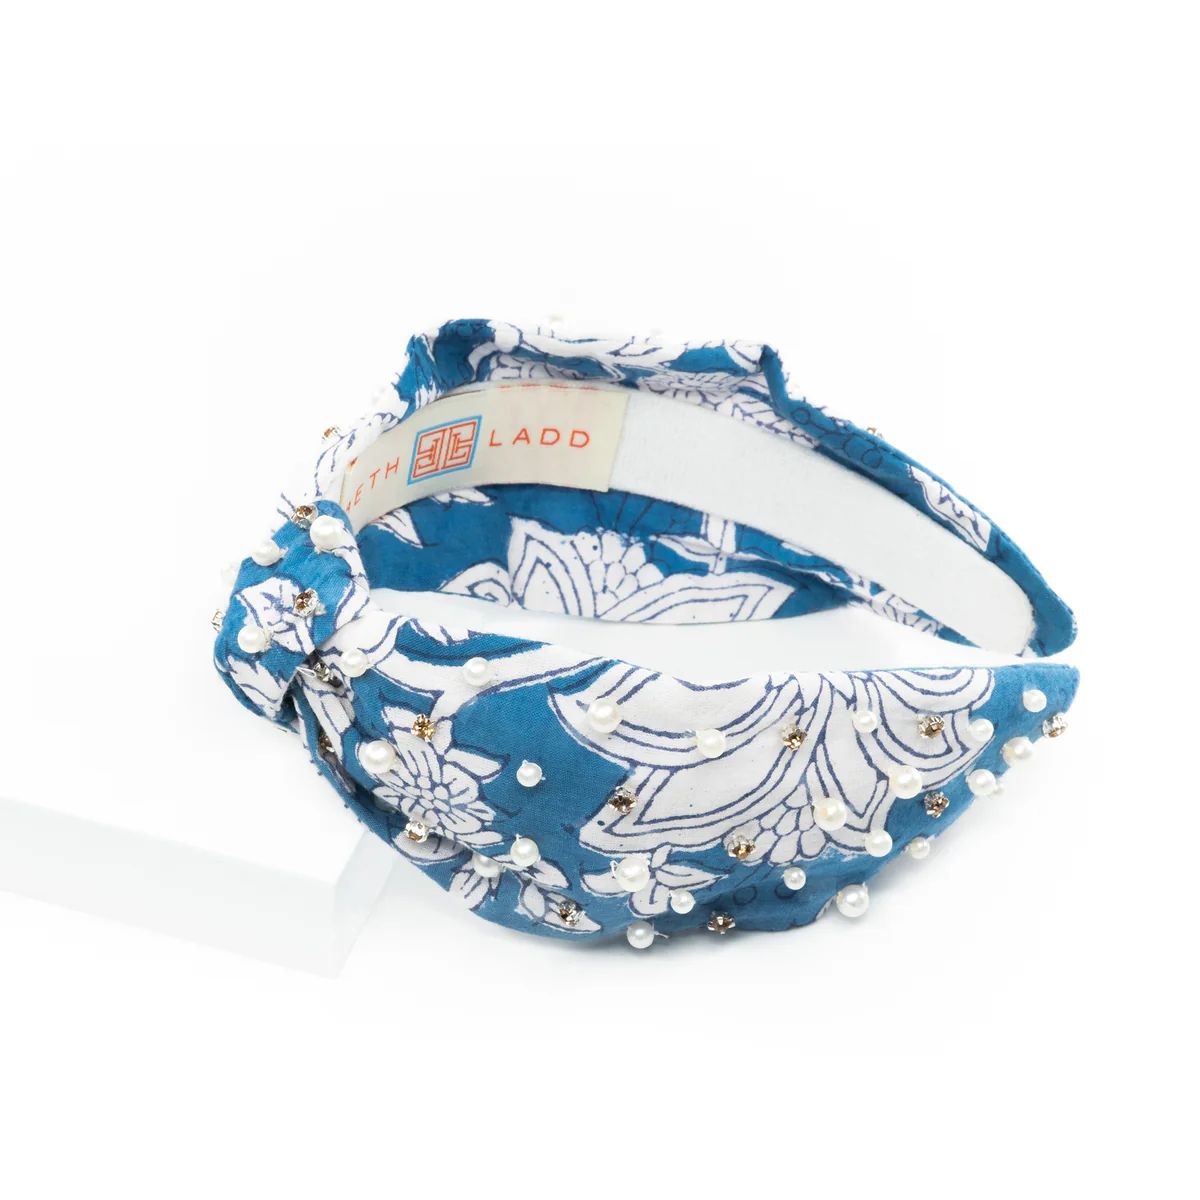 Block Print Headband with Gems in Sconset Blue | Beth Ladd Collections